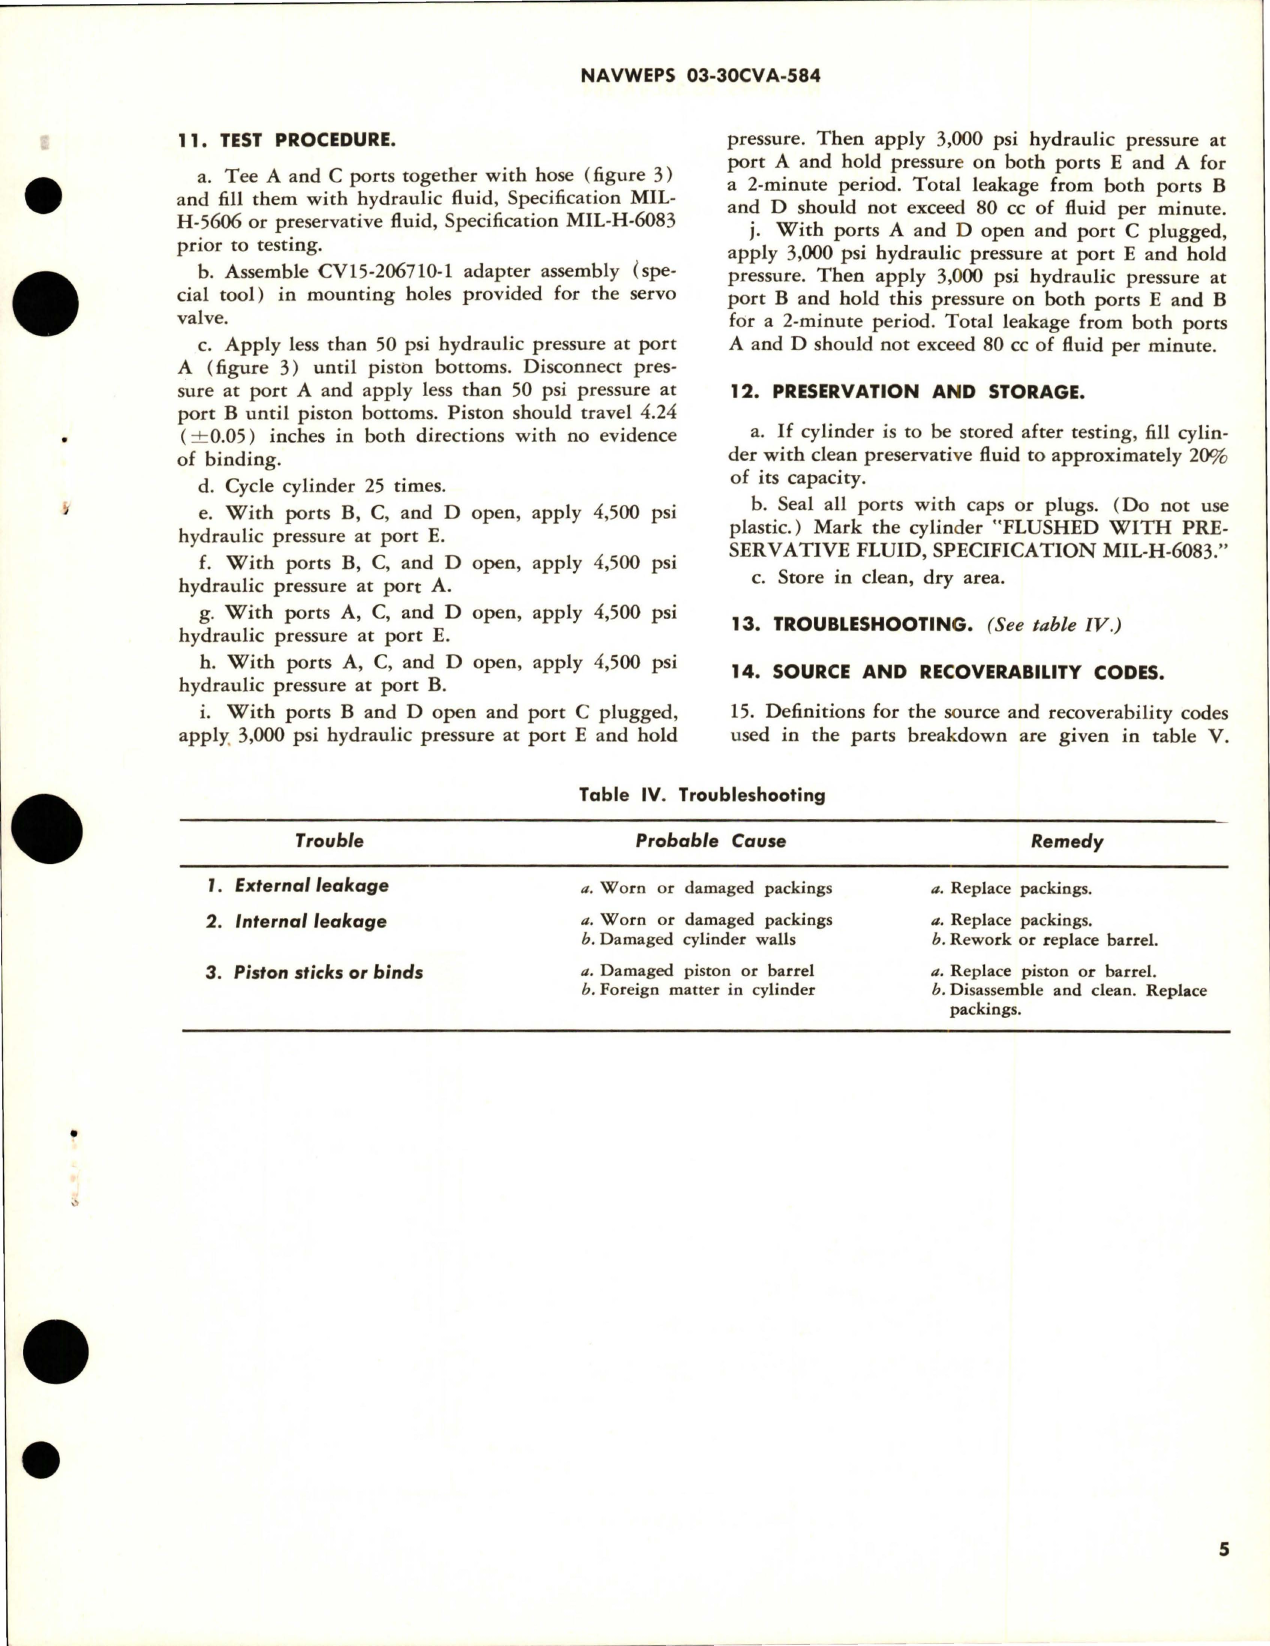 Sample page 5 from AirCorps Library document: Overhaul Instructions with Parts Breakdown for Nose Gear Steering Cylinder Assembly - CV15-401196-9, CV15-401196-11, CV15-401196-12 and CV99-045206-2